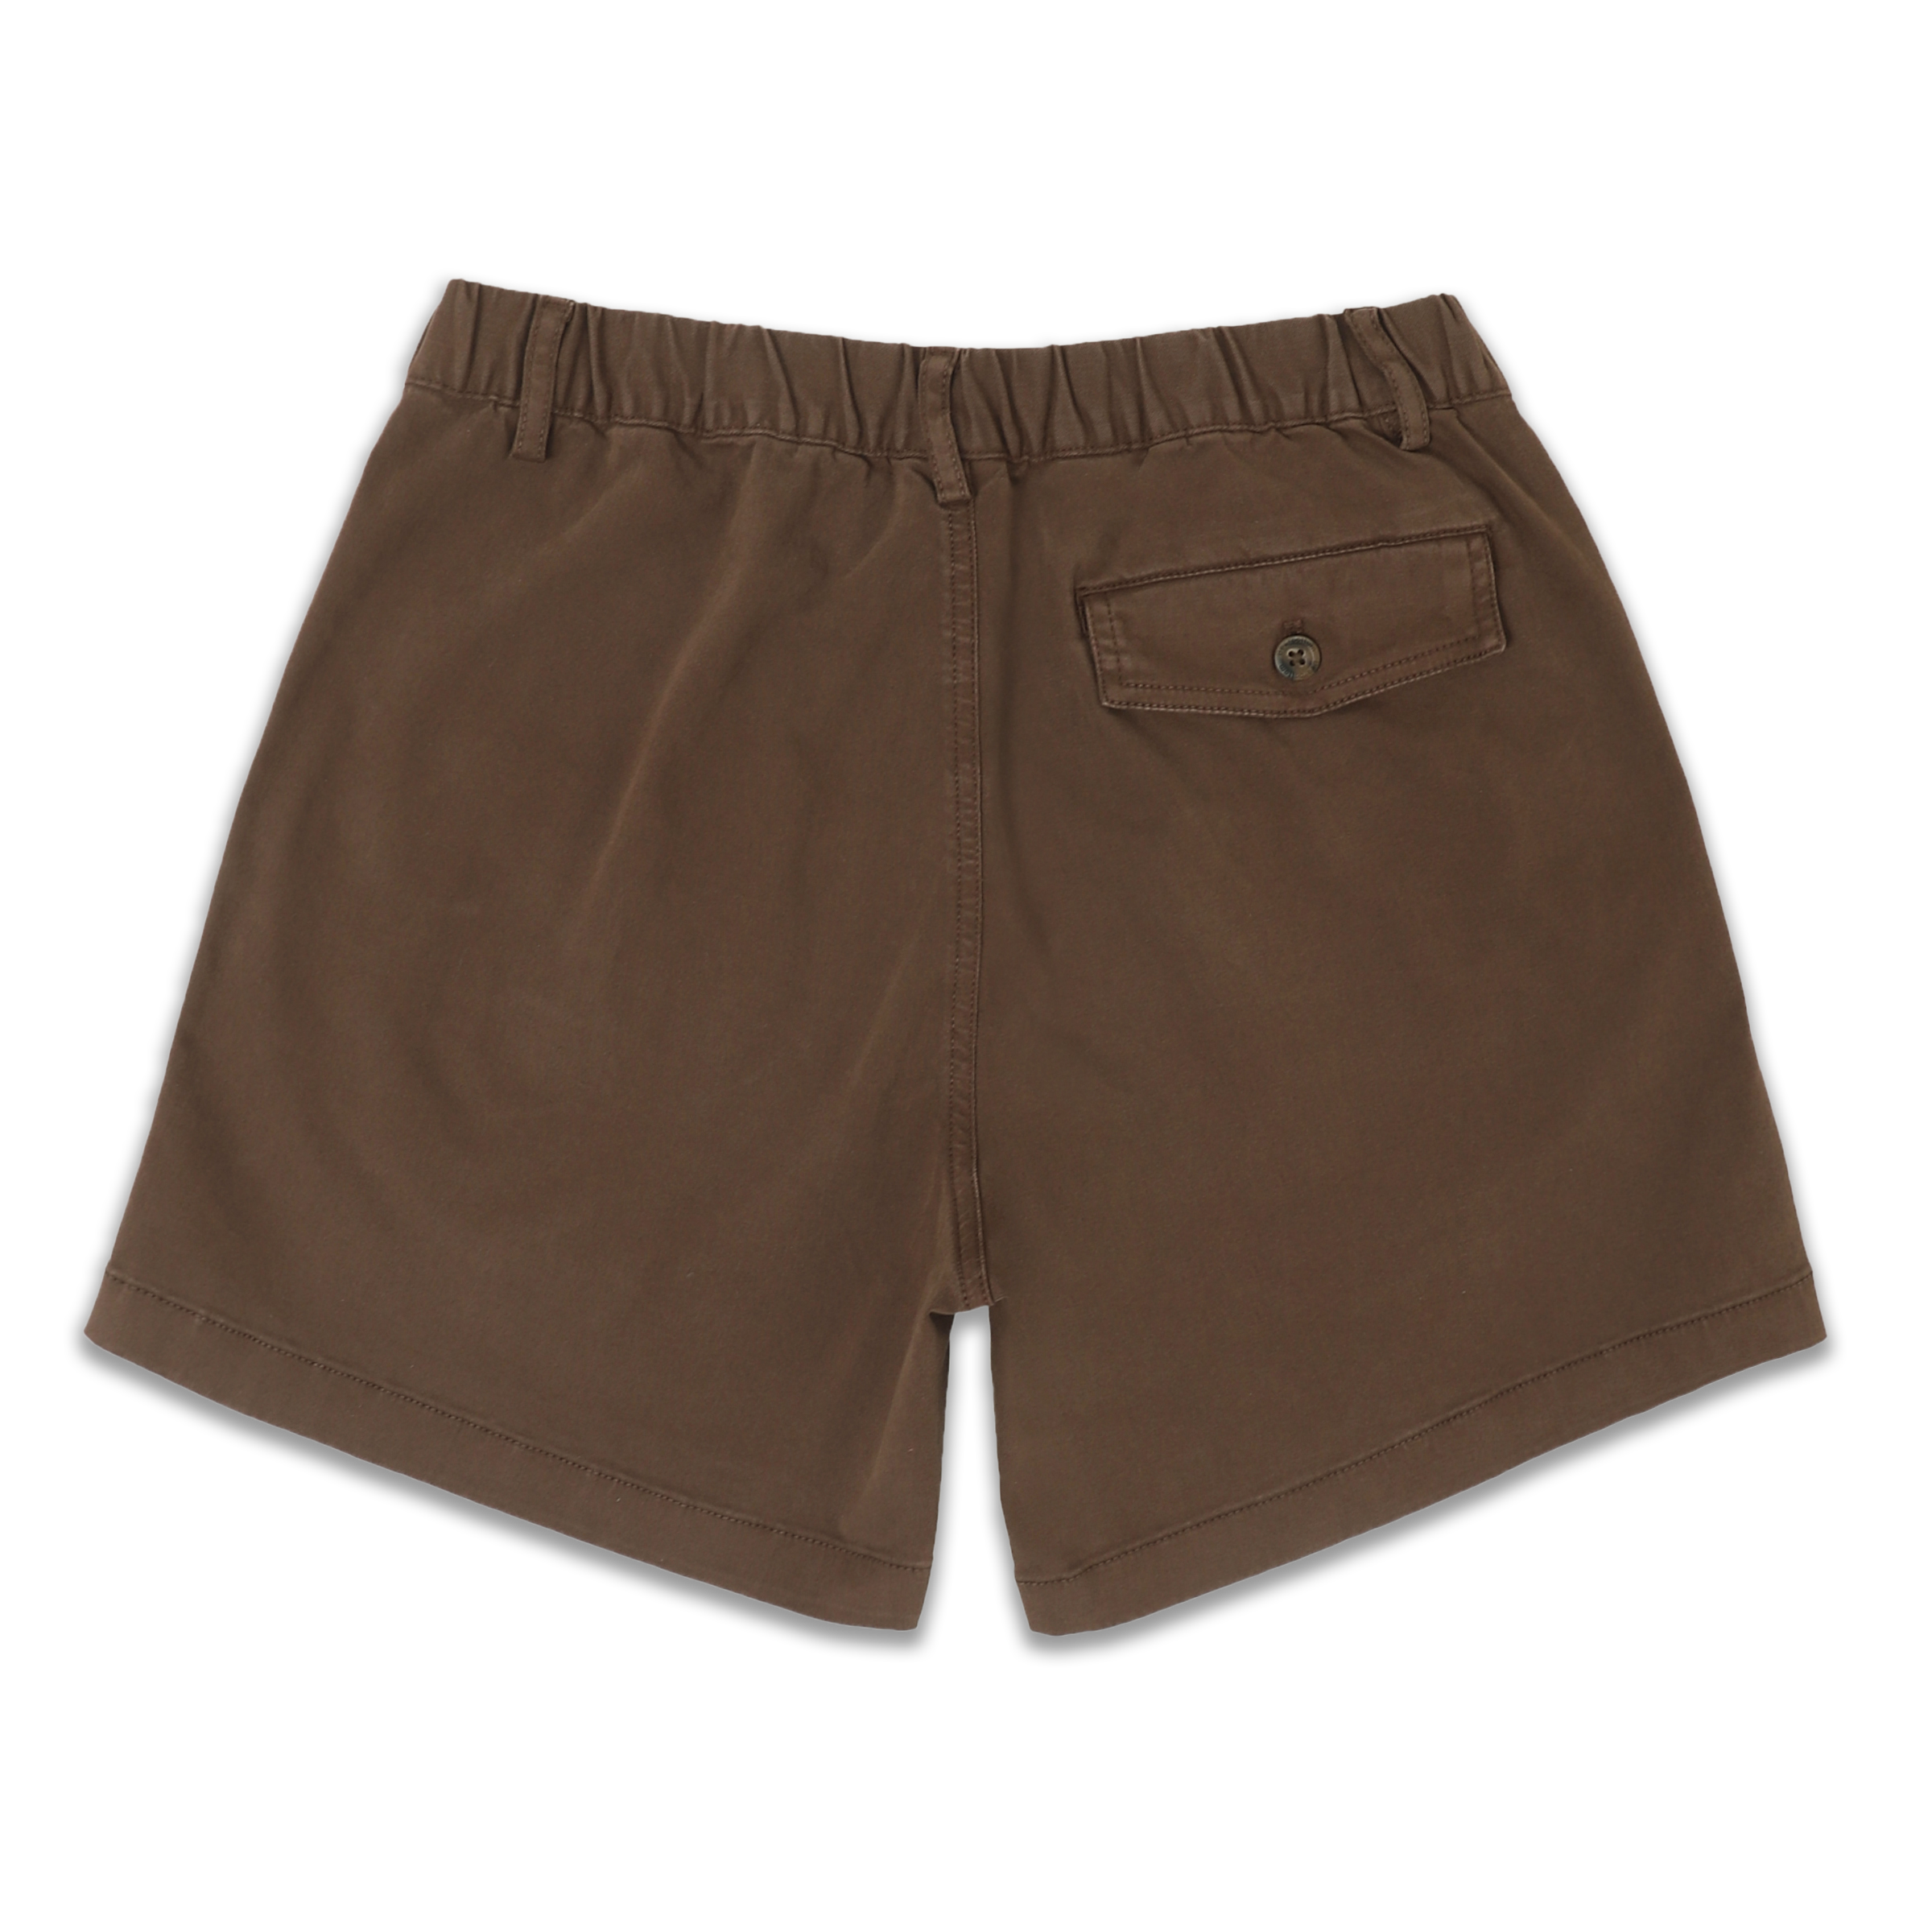 Stretch Short 5.5" Cocoa back with elastic waistband, belt loops, and right buttoned back pocket